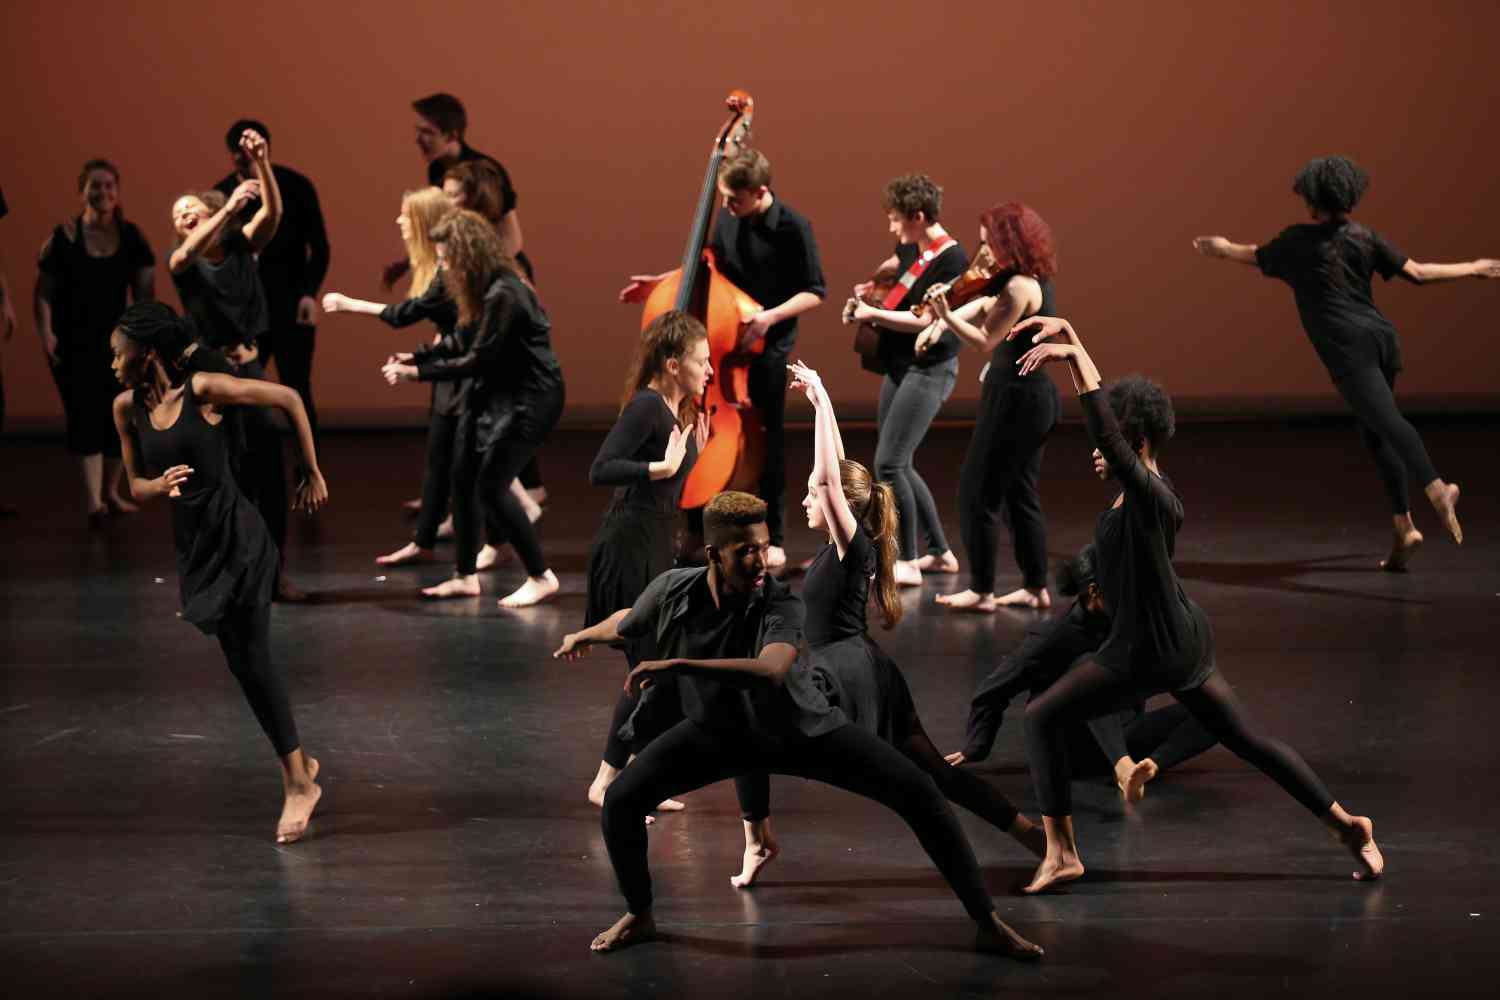 'Coniungere'.  A music and dance performance collaboration between Lewisham Southwark College and Rose Bruford College performed at the Laban Theatre, London (March 2015).  Choreography: Stephen Mason and performers. Musical Direction: Jeremy Harrison. performed at the Laban Theatre, London (March 2015).